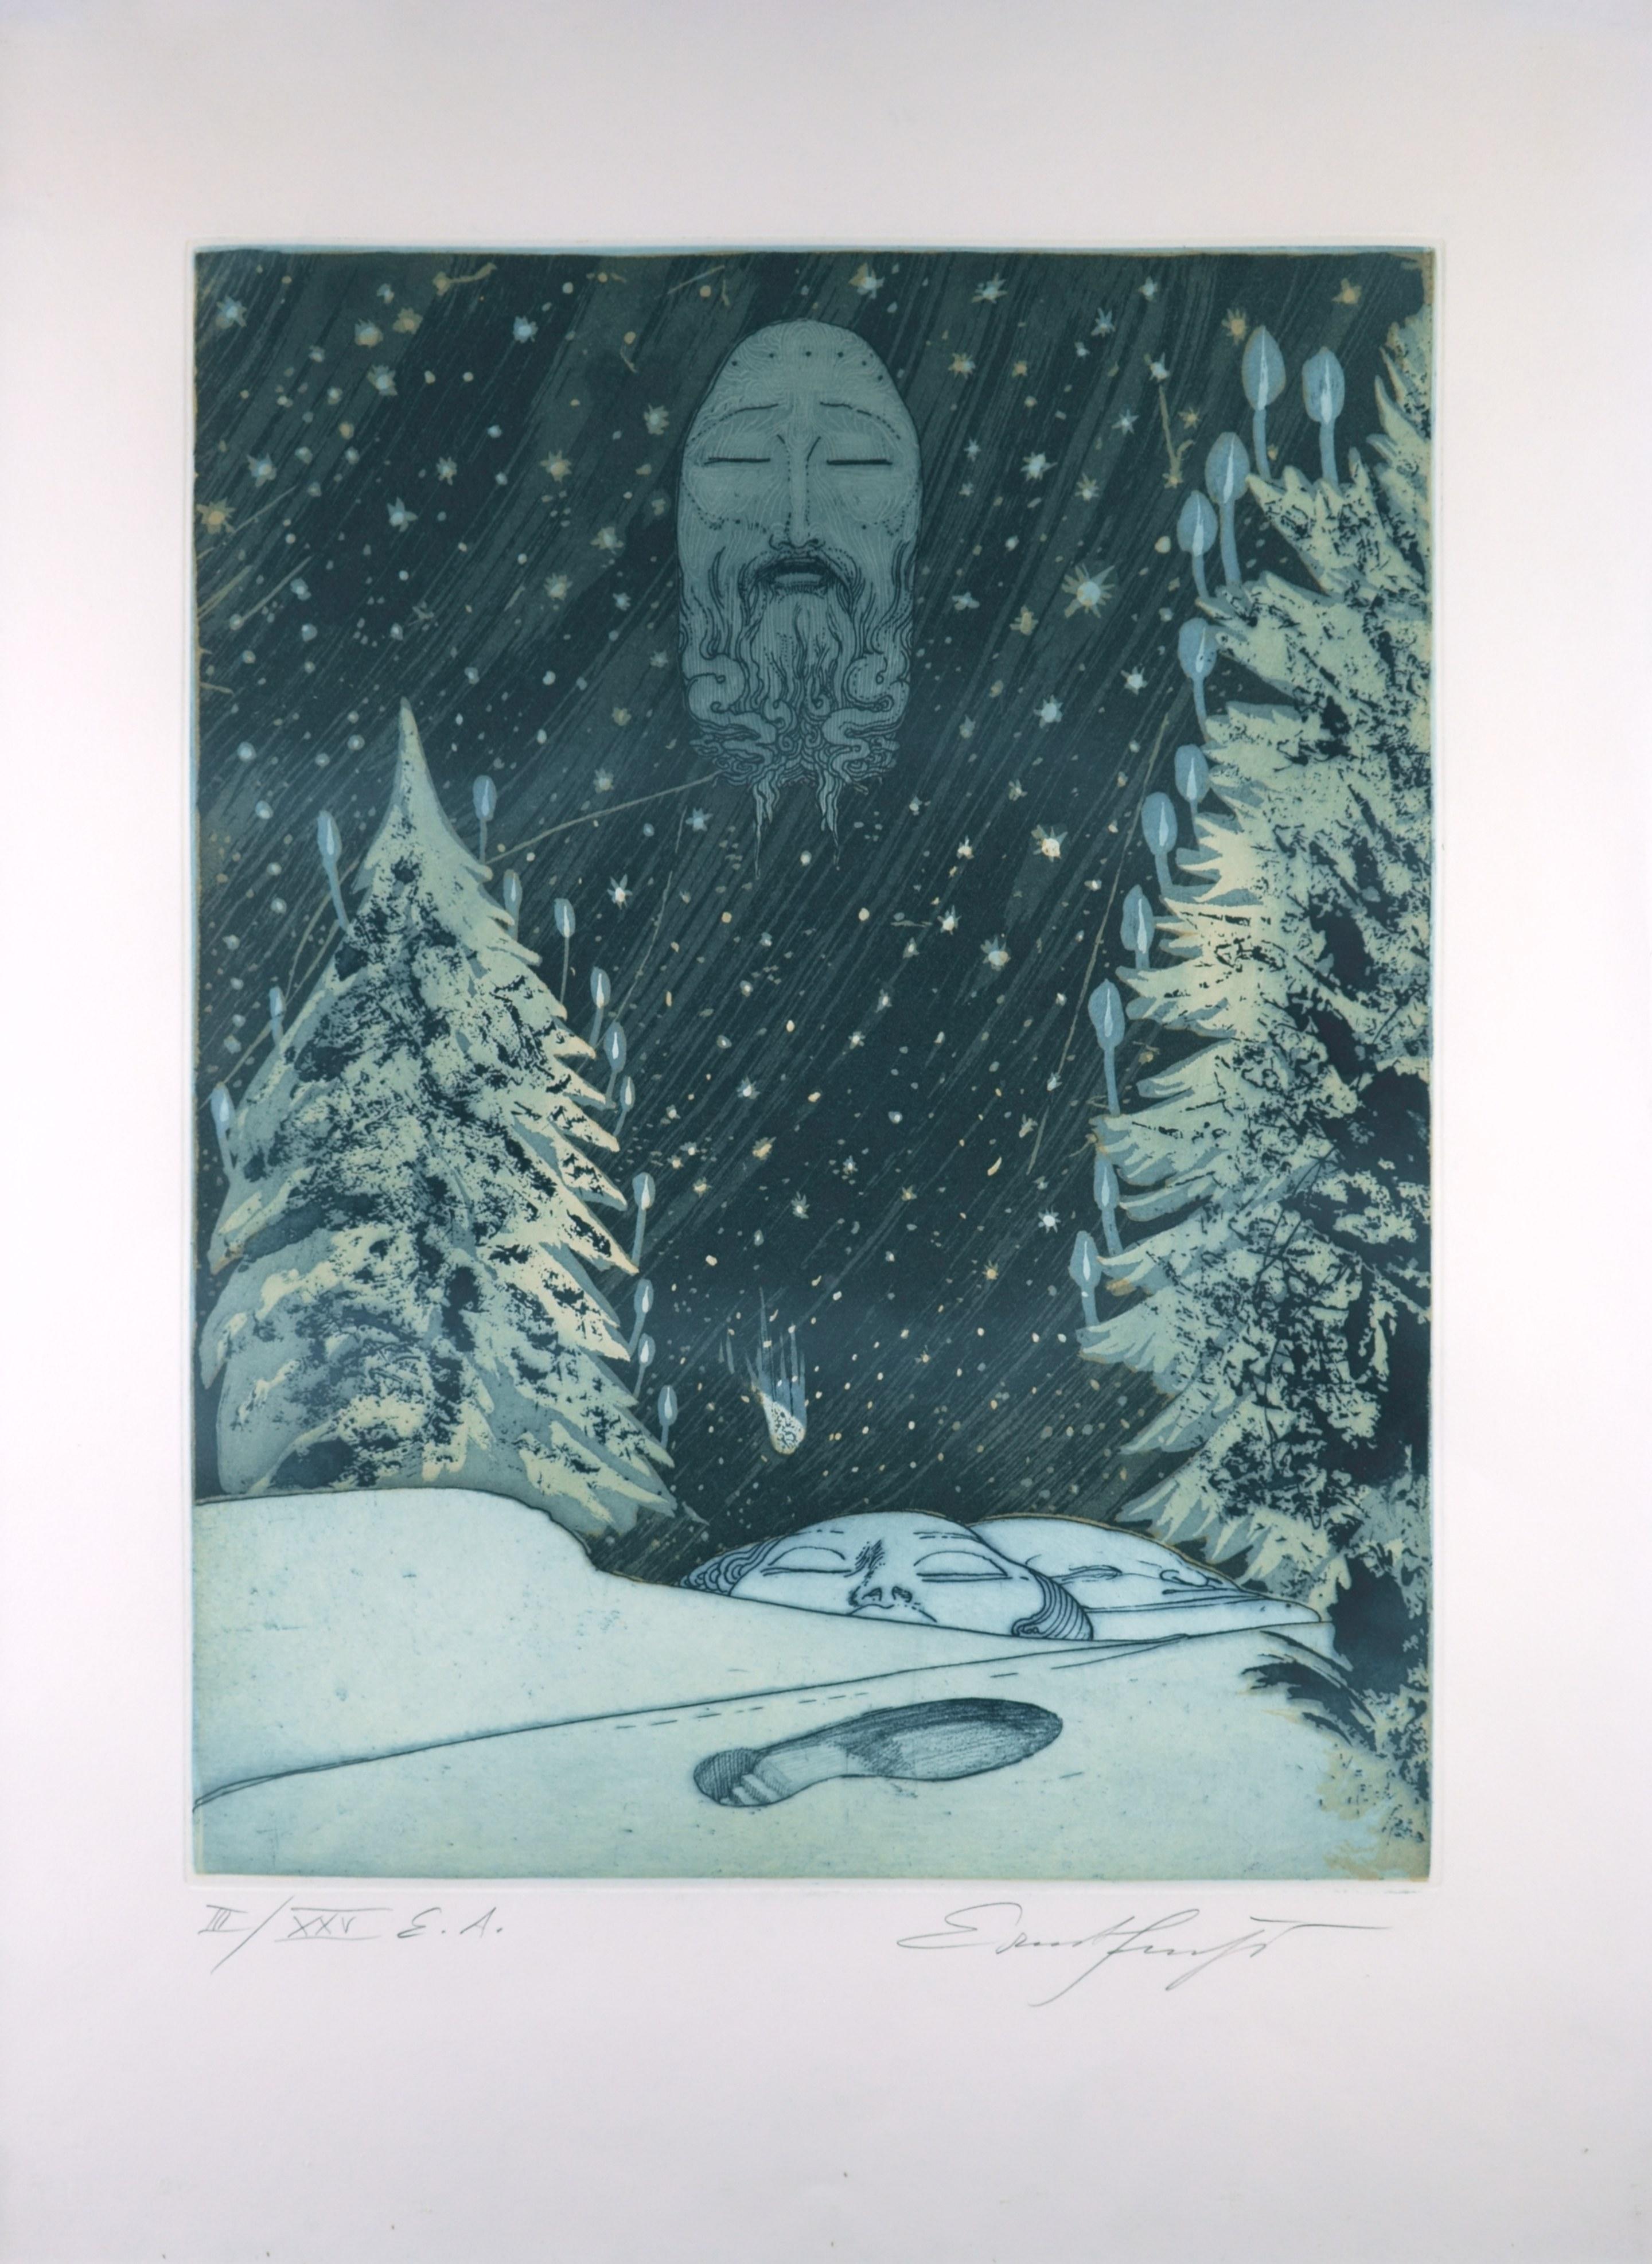 Ernst Fuchs (1930 Vienna - 2015 ibid), The Lost Trace, 1972. Vernis mou and aquatint etching, 46.8 x 36.4 cm (plate), 66 x 50 cm (sheet), 69.5 x 53.5 cm (frame), WVZ Hartmann no. 185 Id, signed by hand in pencil at lower right Ernst Fuchs